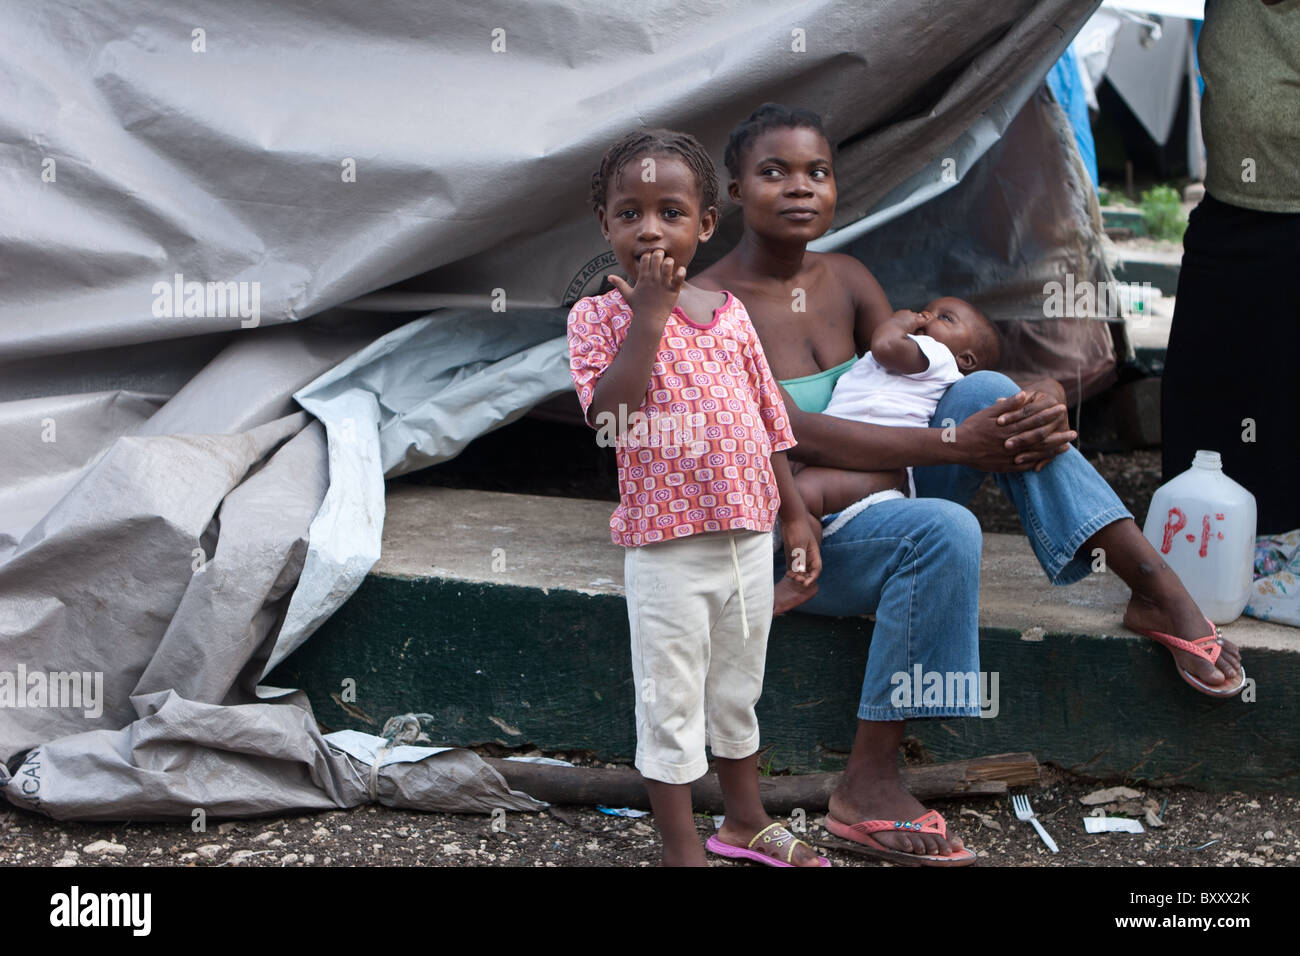 A camp for internally displaced persons (IDP's) outside of Port-au Prince after a massive earthquake damaged thousands of homes. Stock Photo